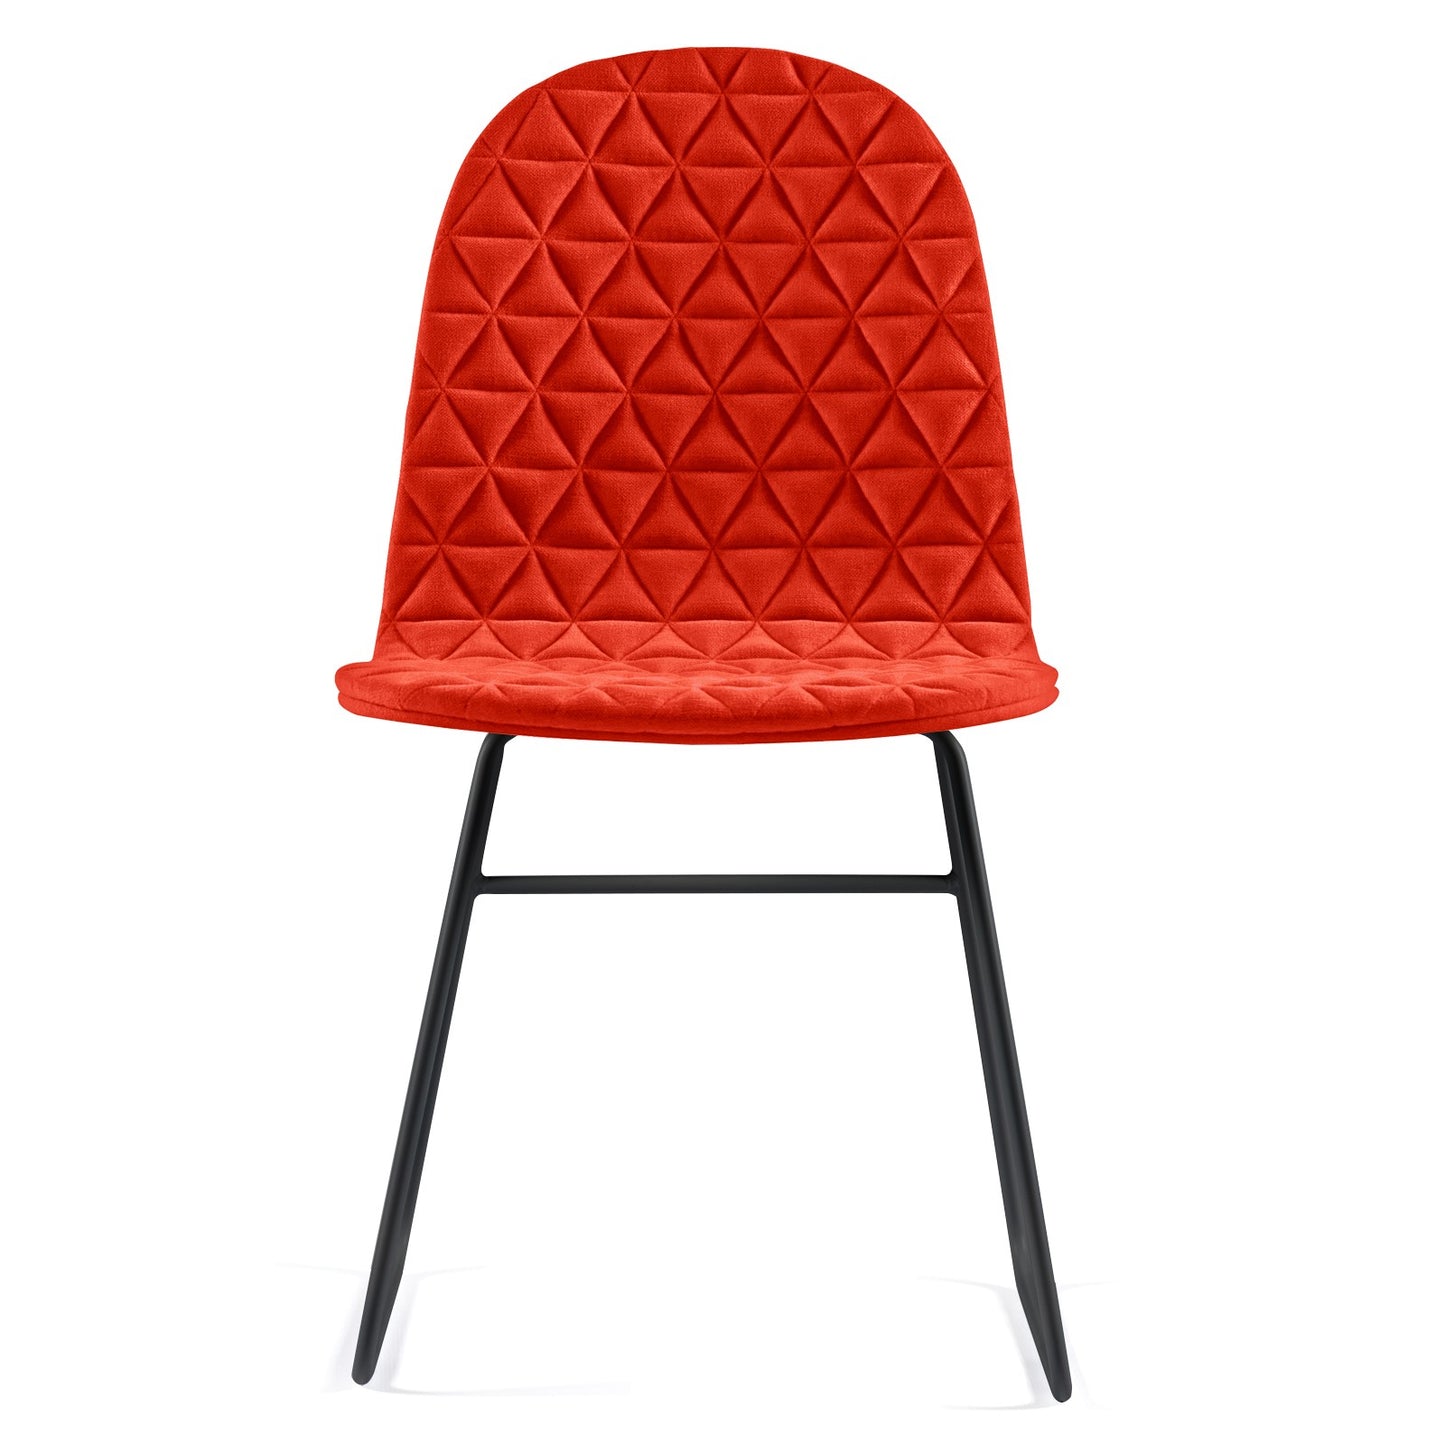 Chair Mannequin 02 - Red